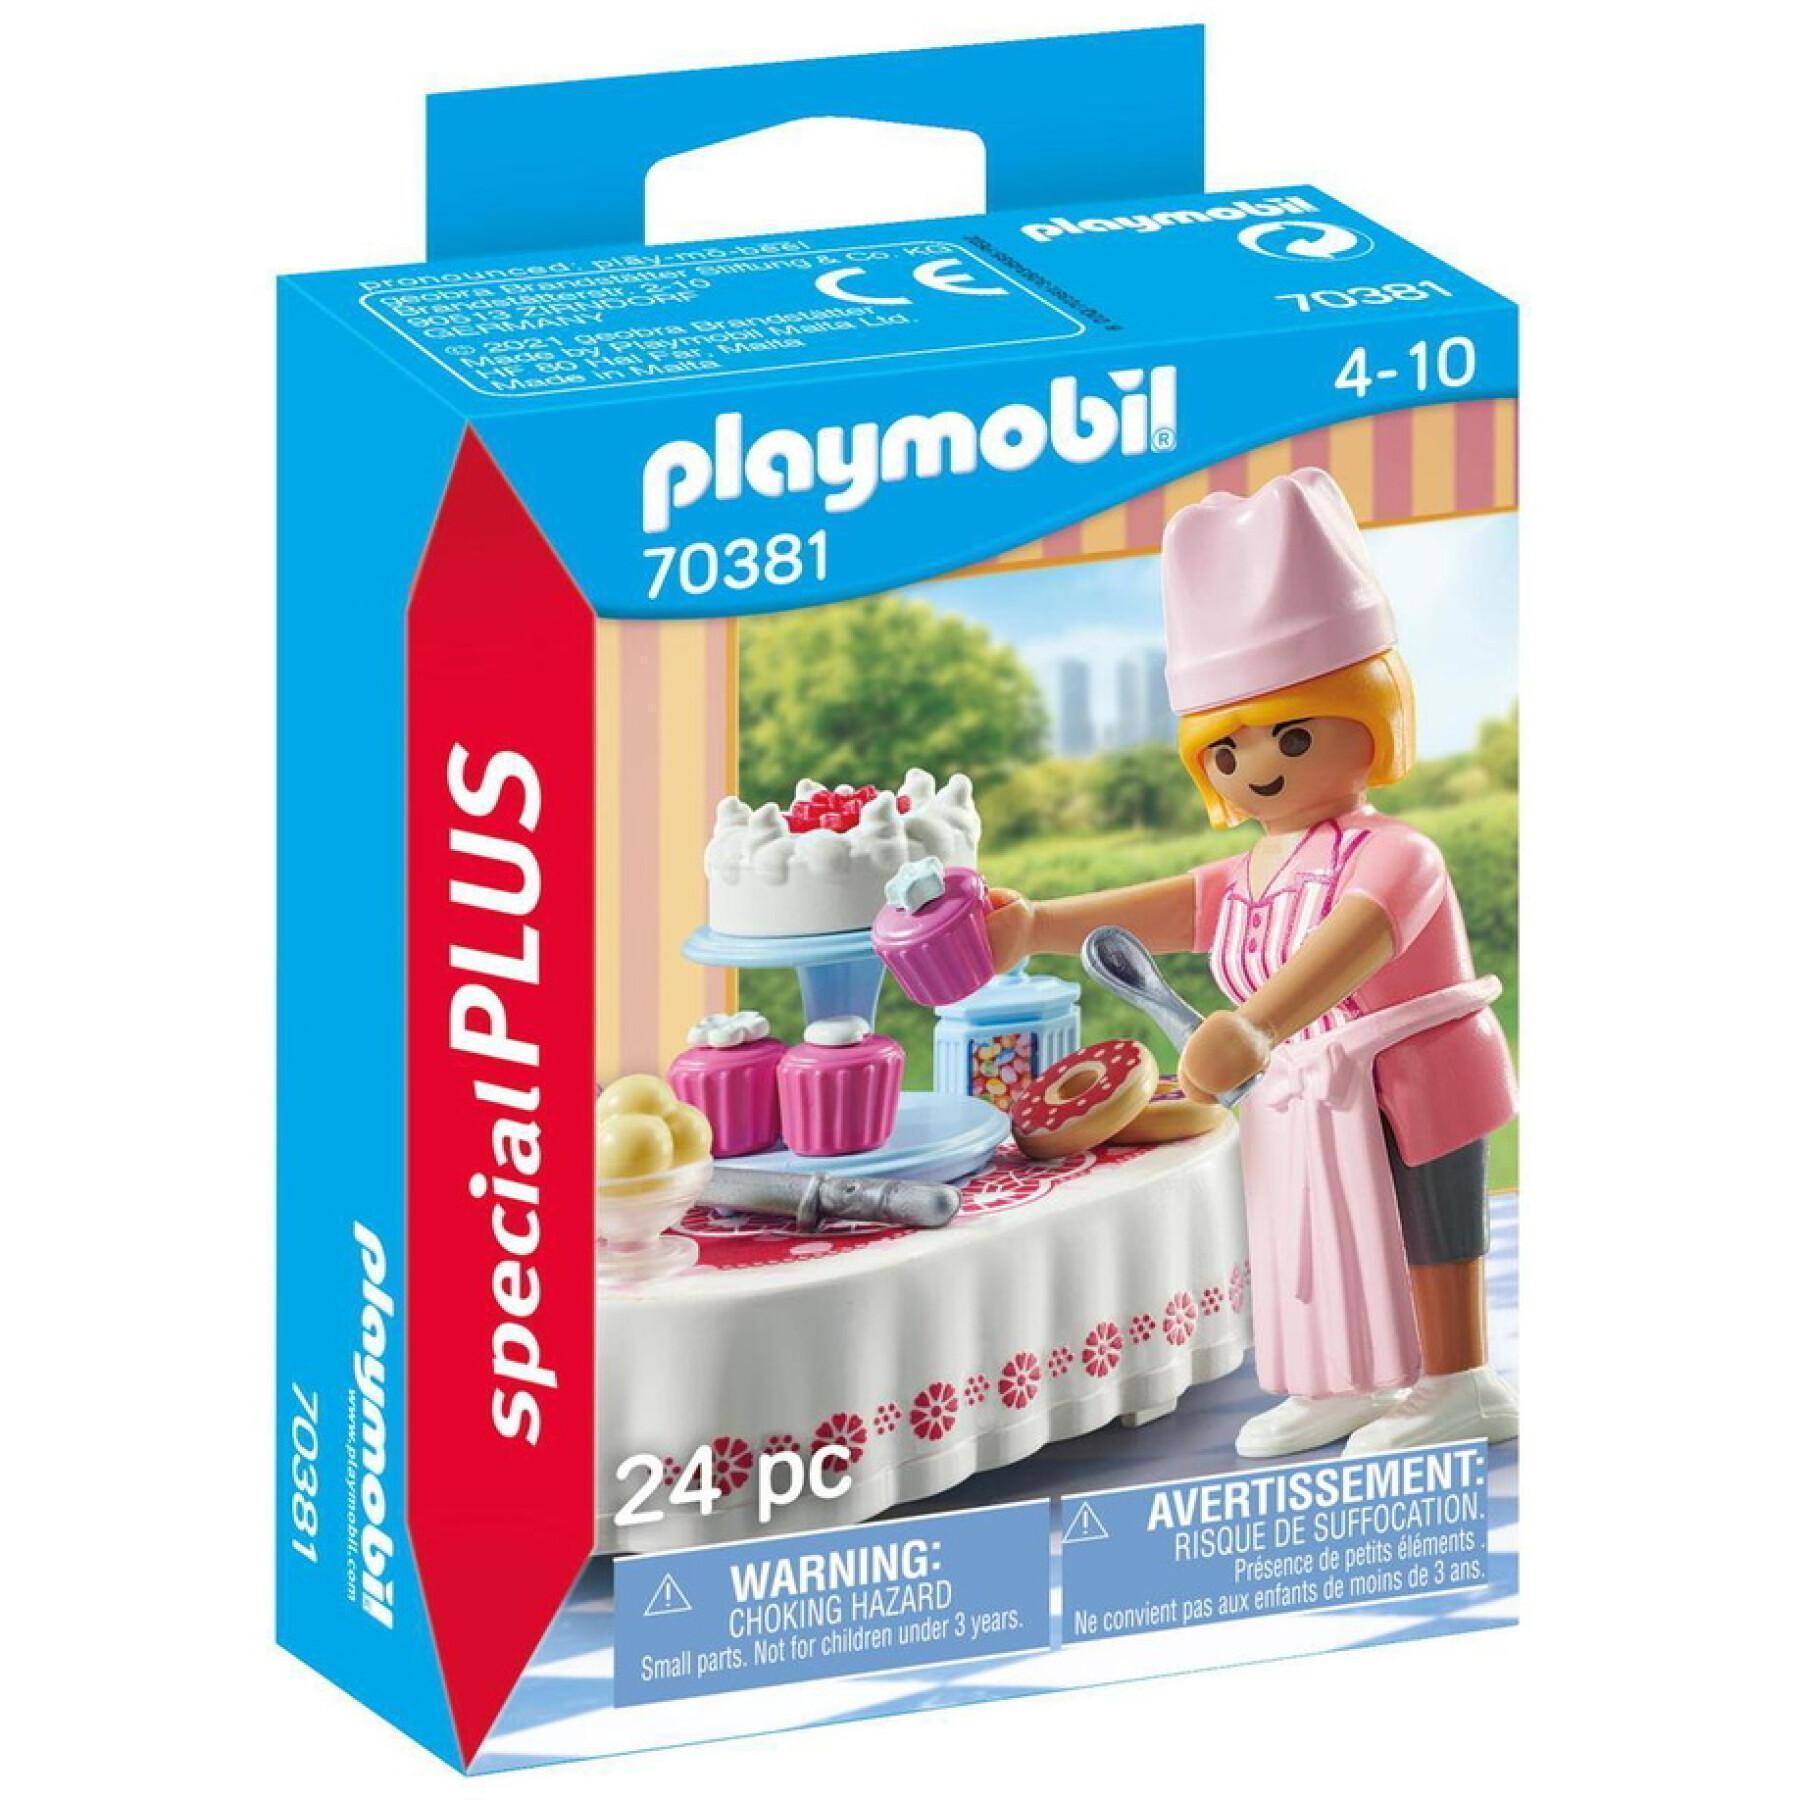 Pastry chef Playmobil